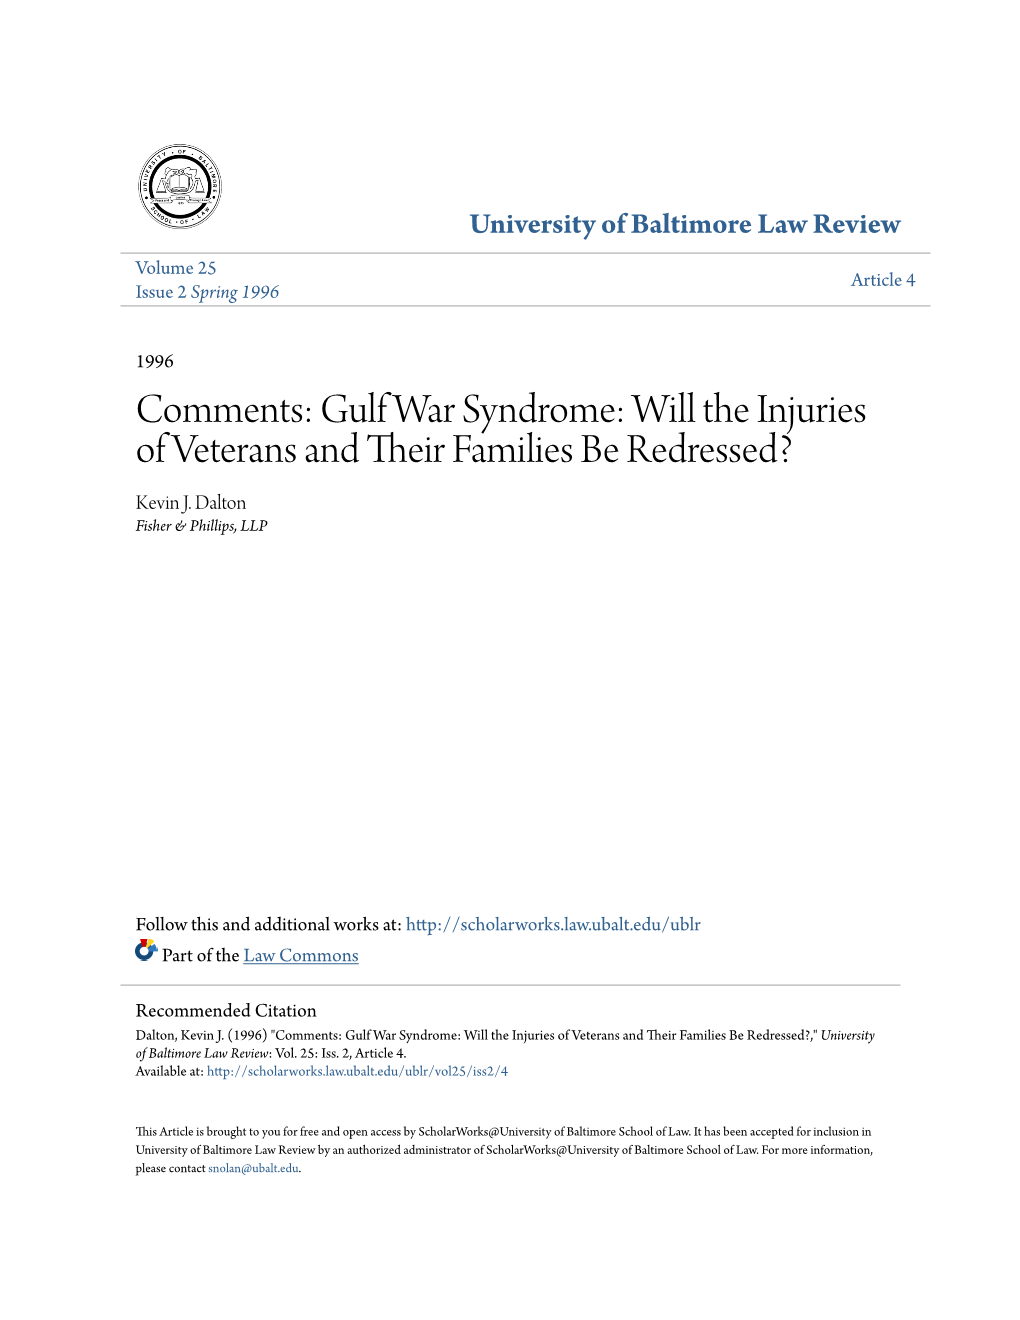 Gulf War Syndrome: Will the Injuries of Veterans and Their Af Milies Be Redressed? Kevin J